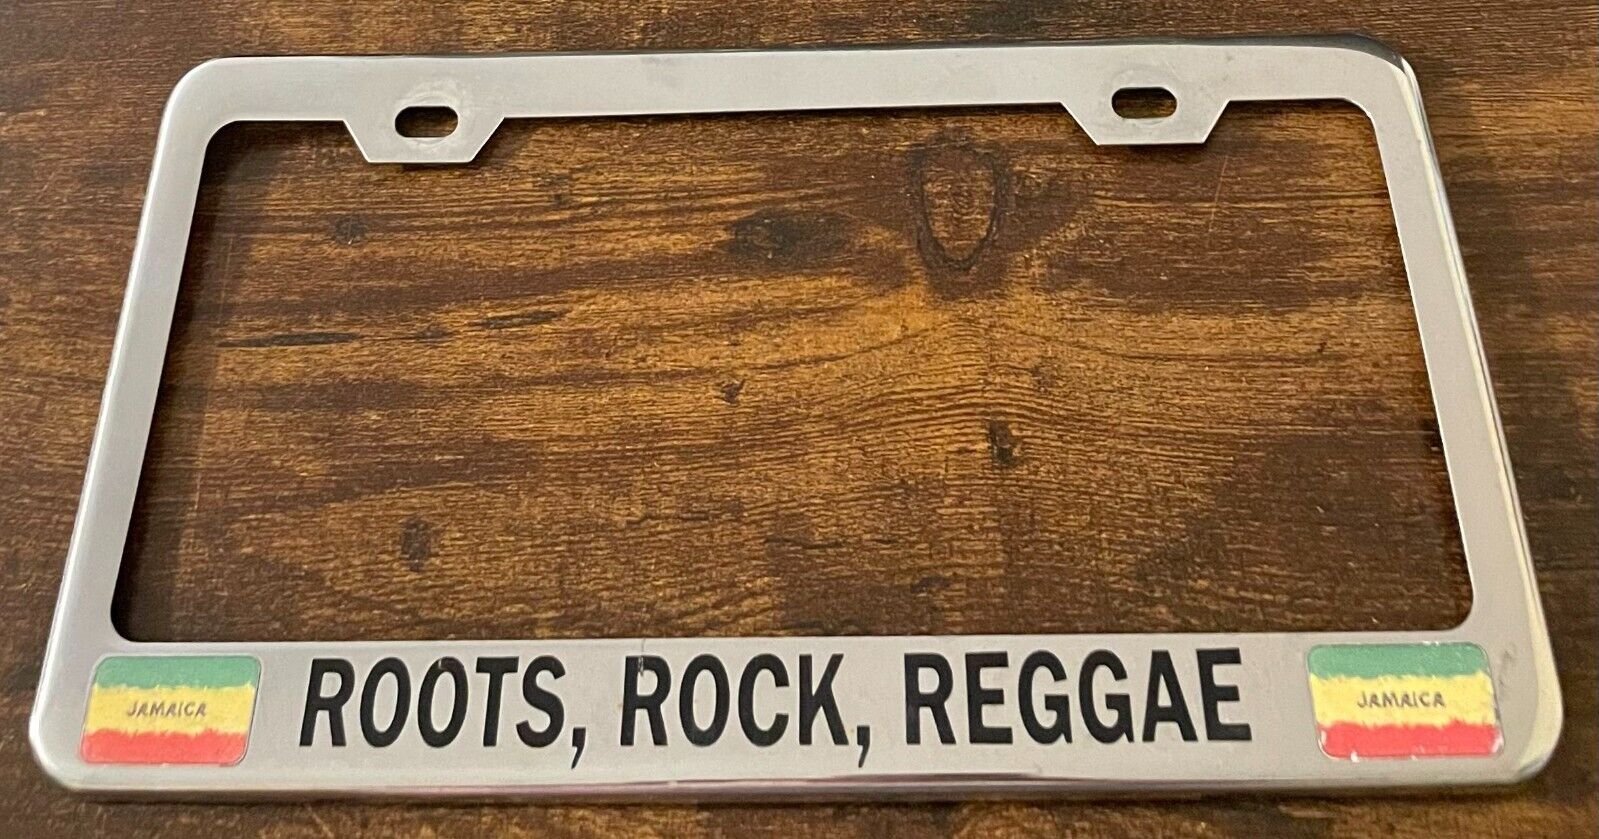 Roots Rock Reggae Jamaica Booster License Plate Frame